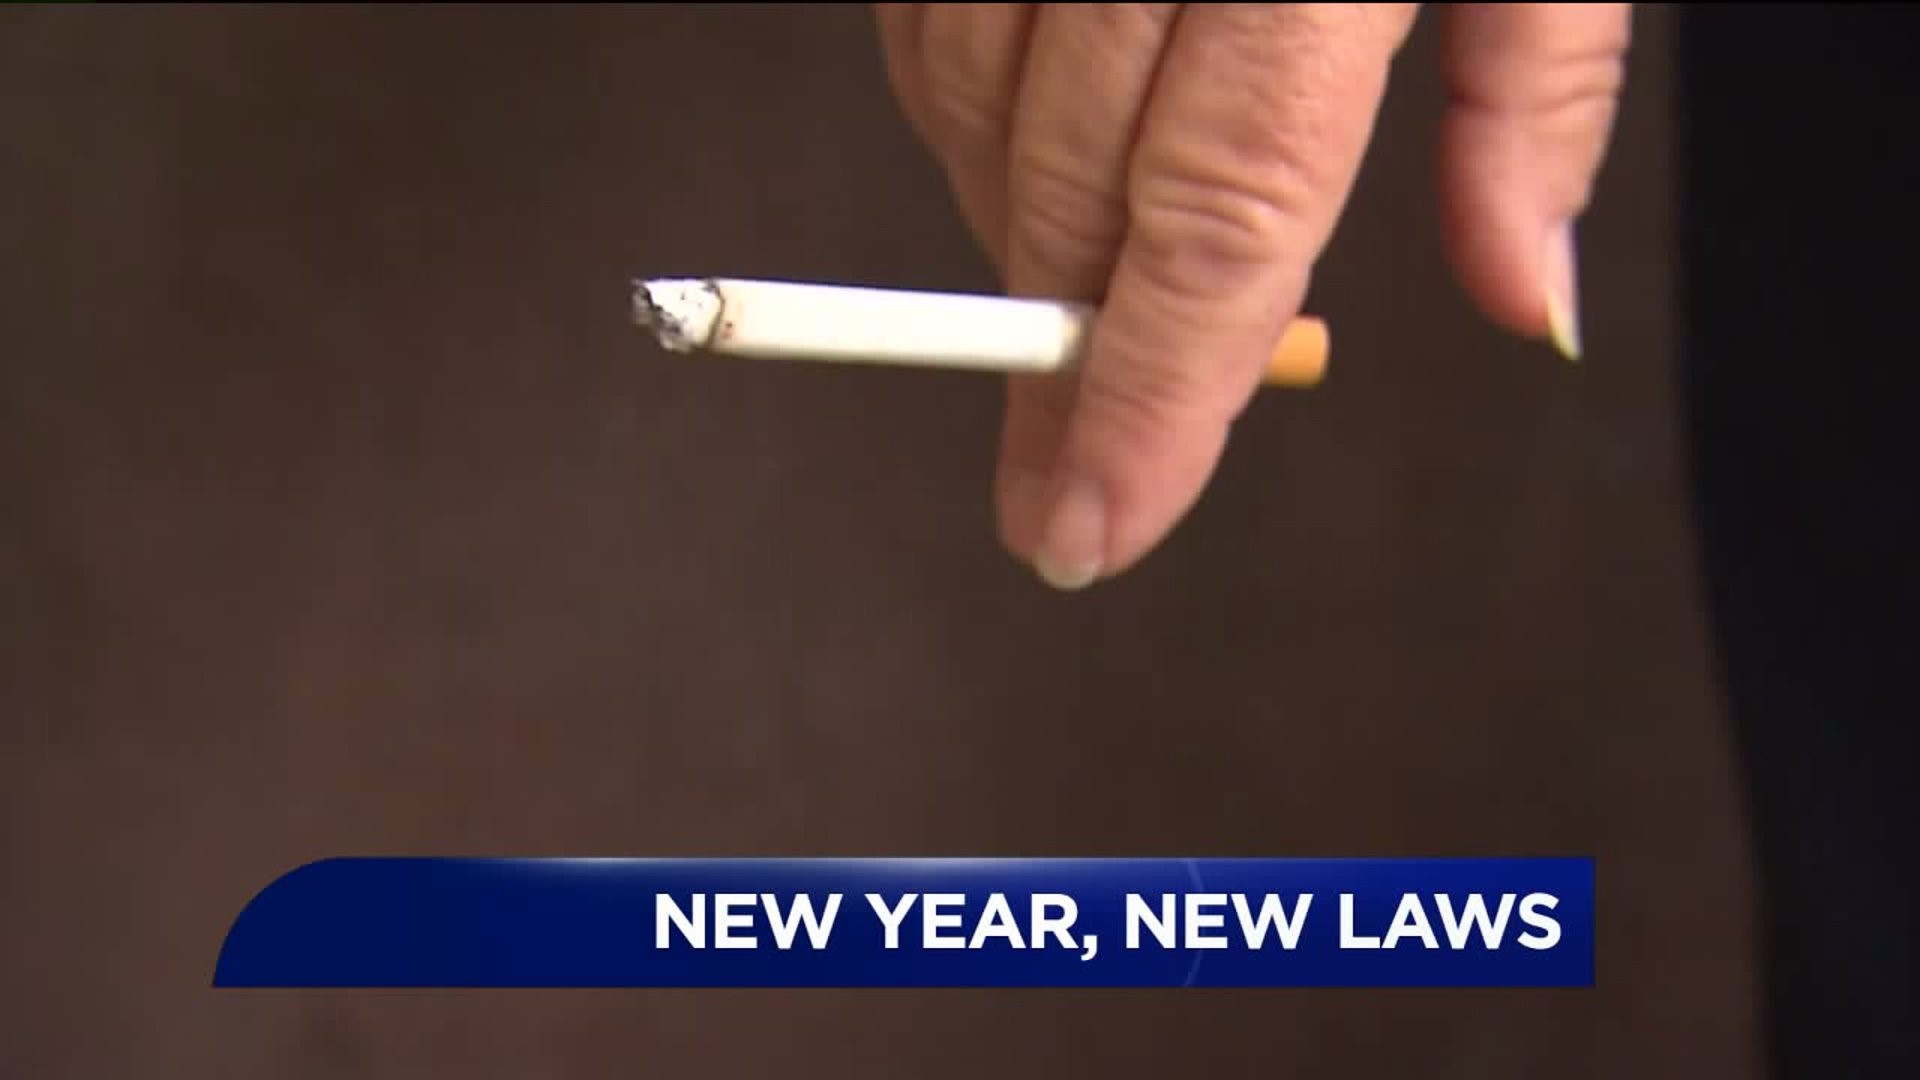 New Year Means New Laws in Pennsylvania